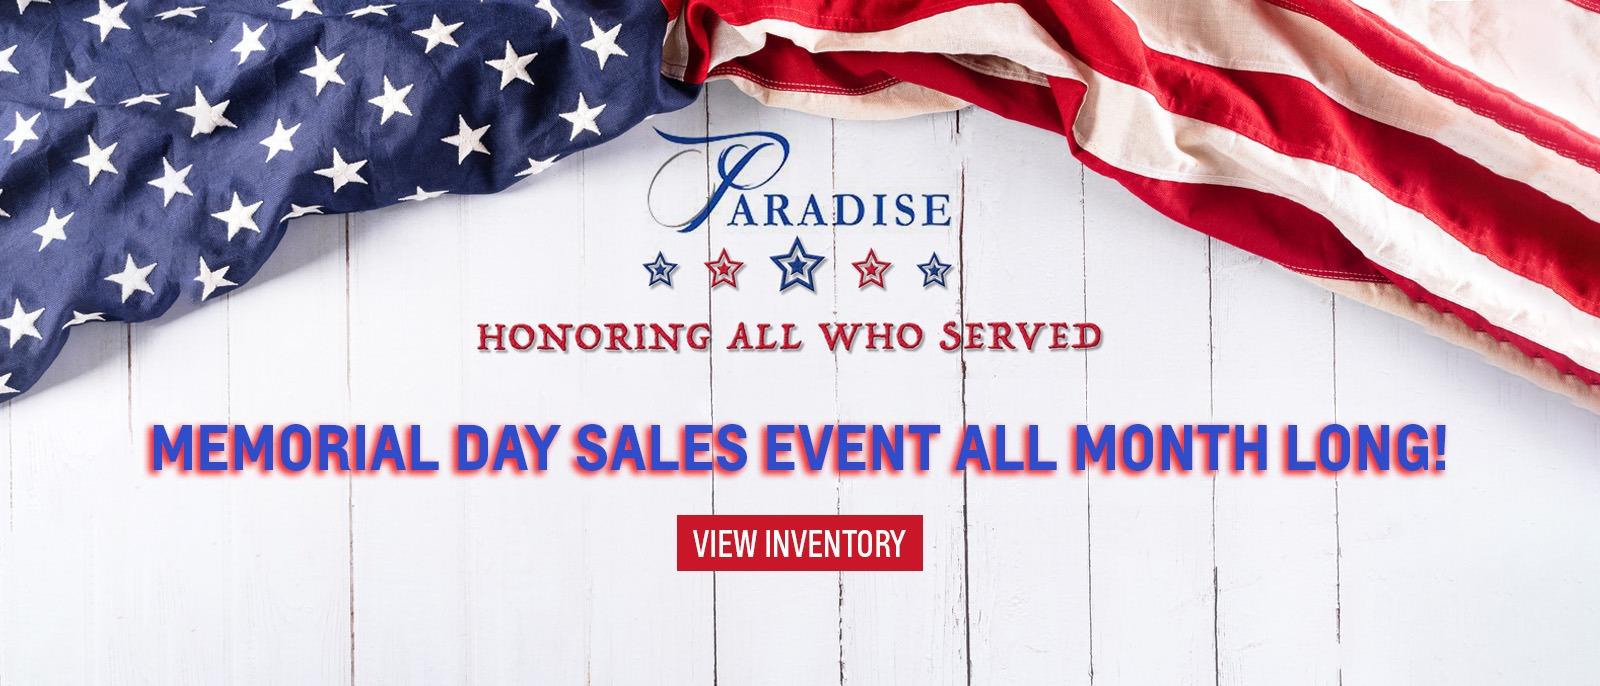 Memorial Day Sales Event All Month Long!